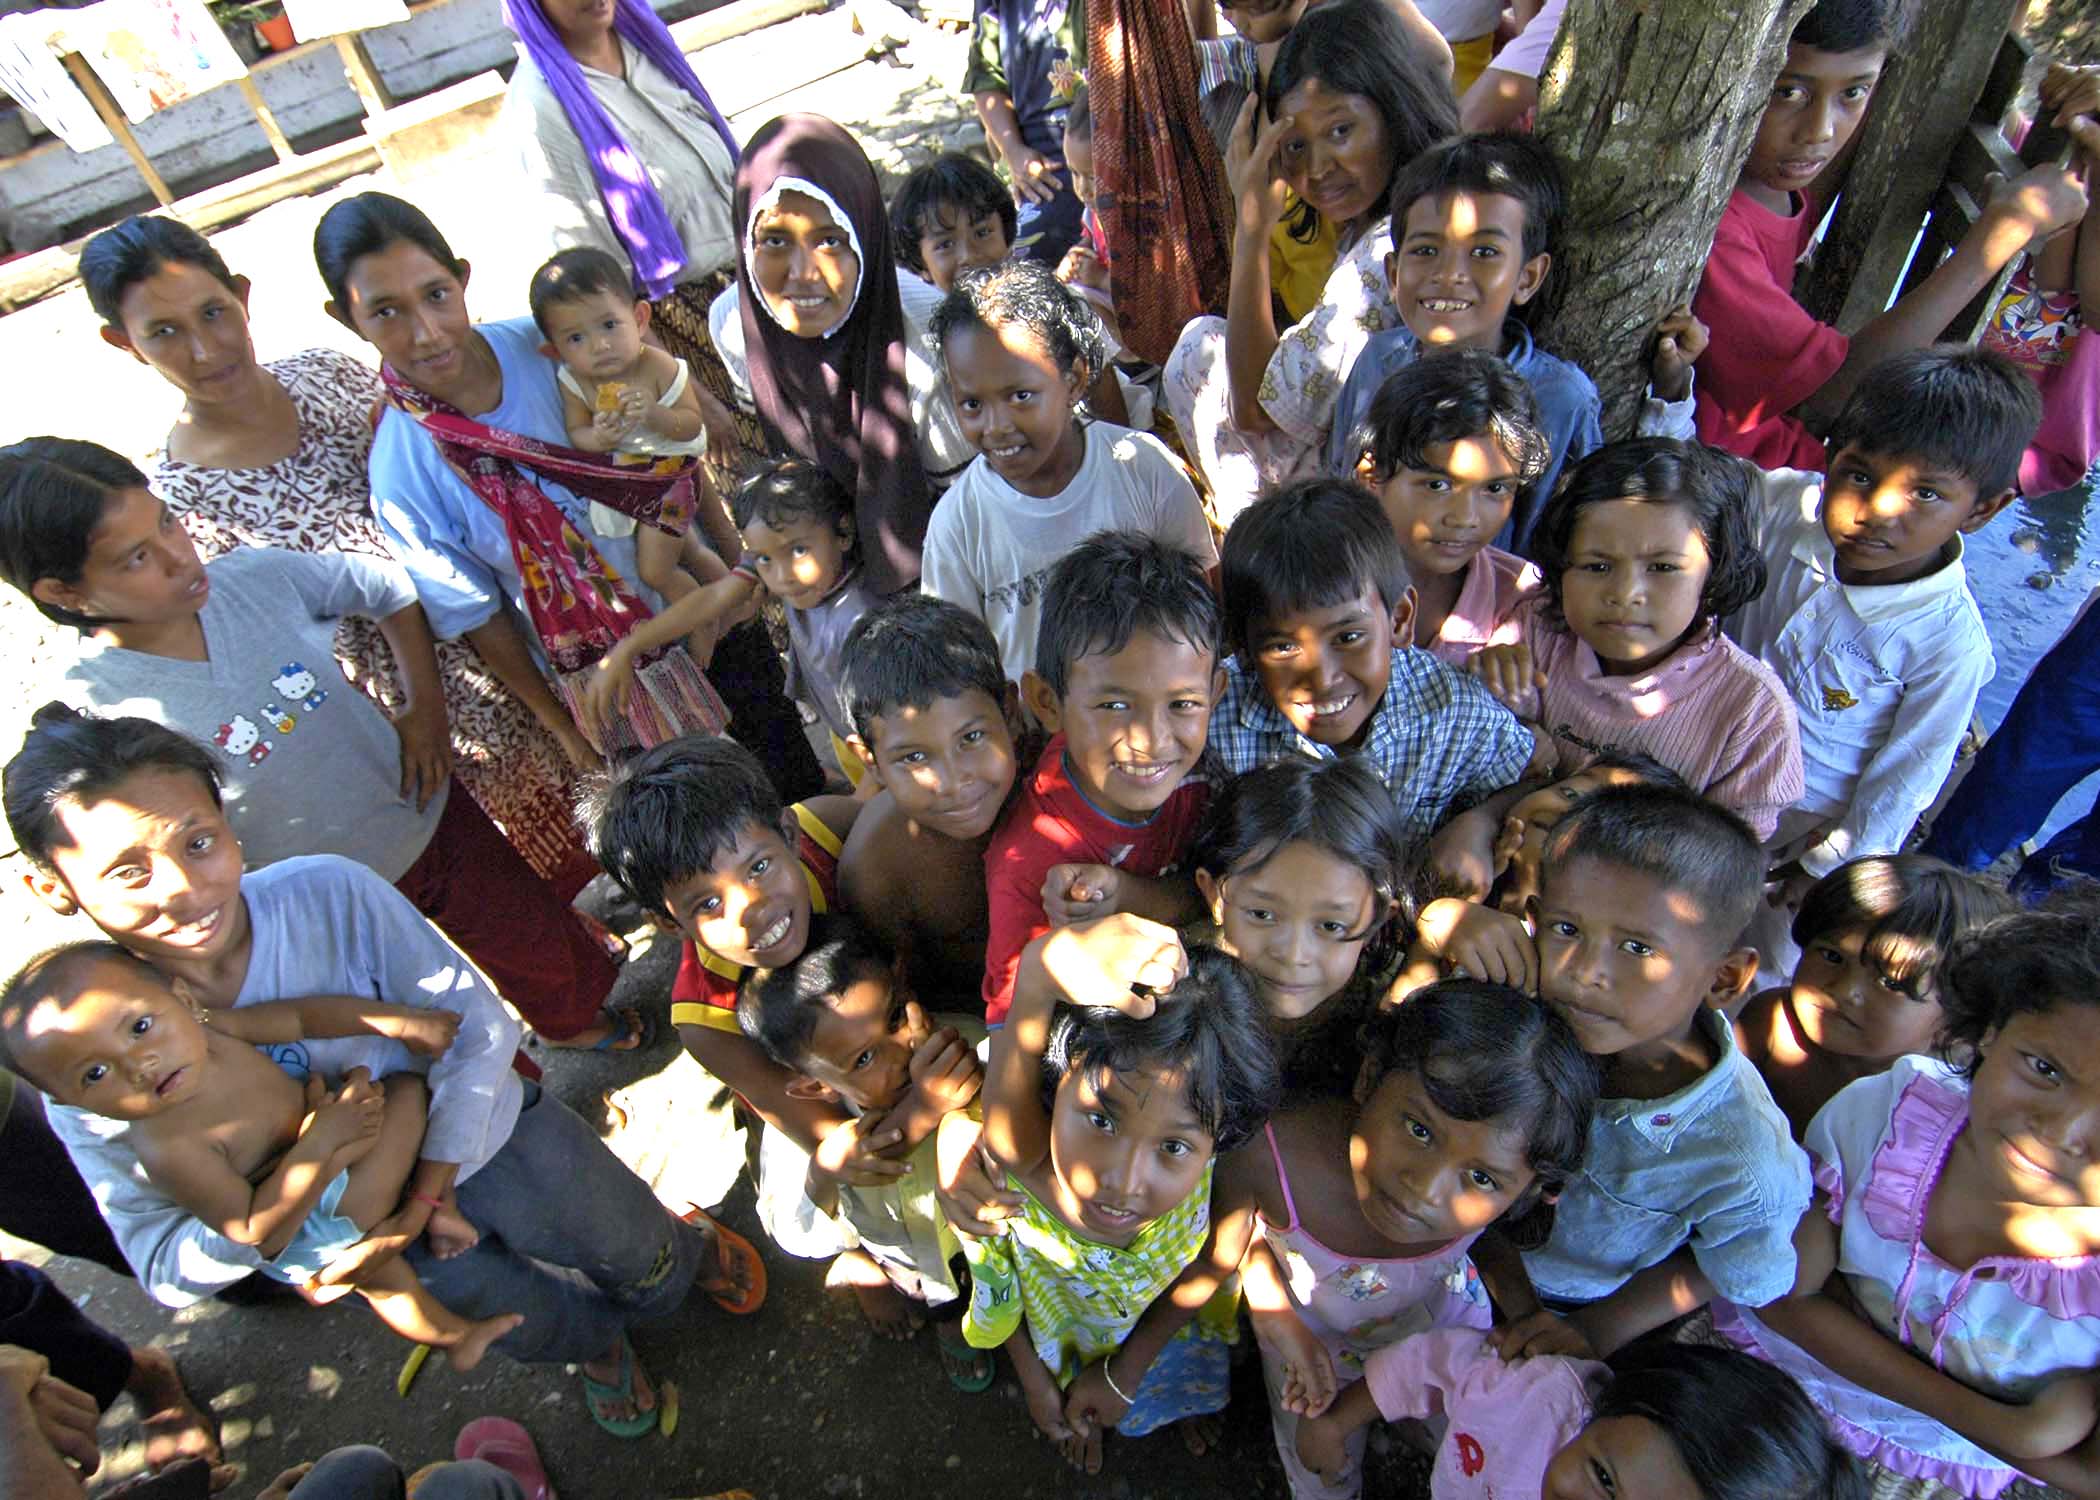 US Navy 050115-N-9951E-146 Children smile and gather for a group photo in the town of Lamno, Sumatra